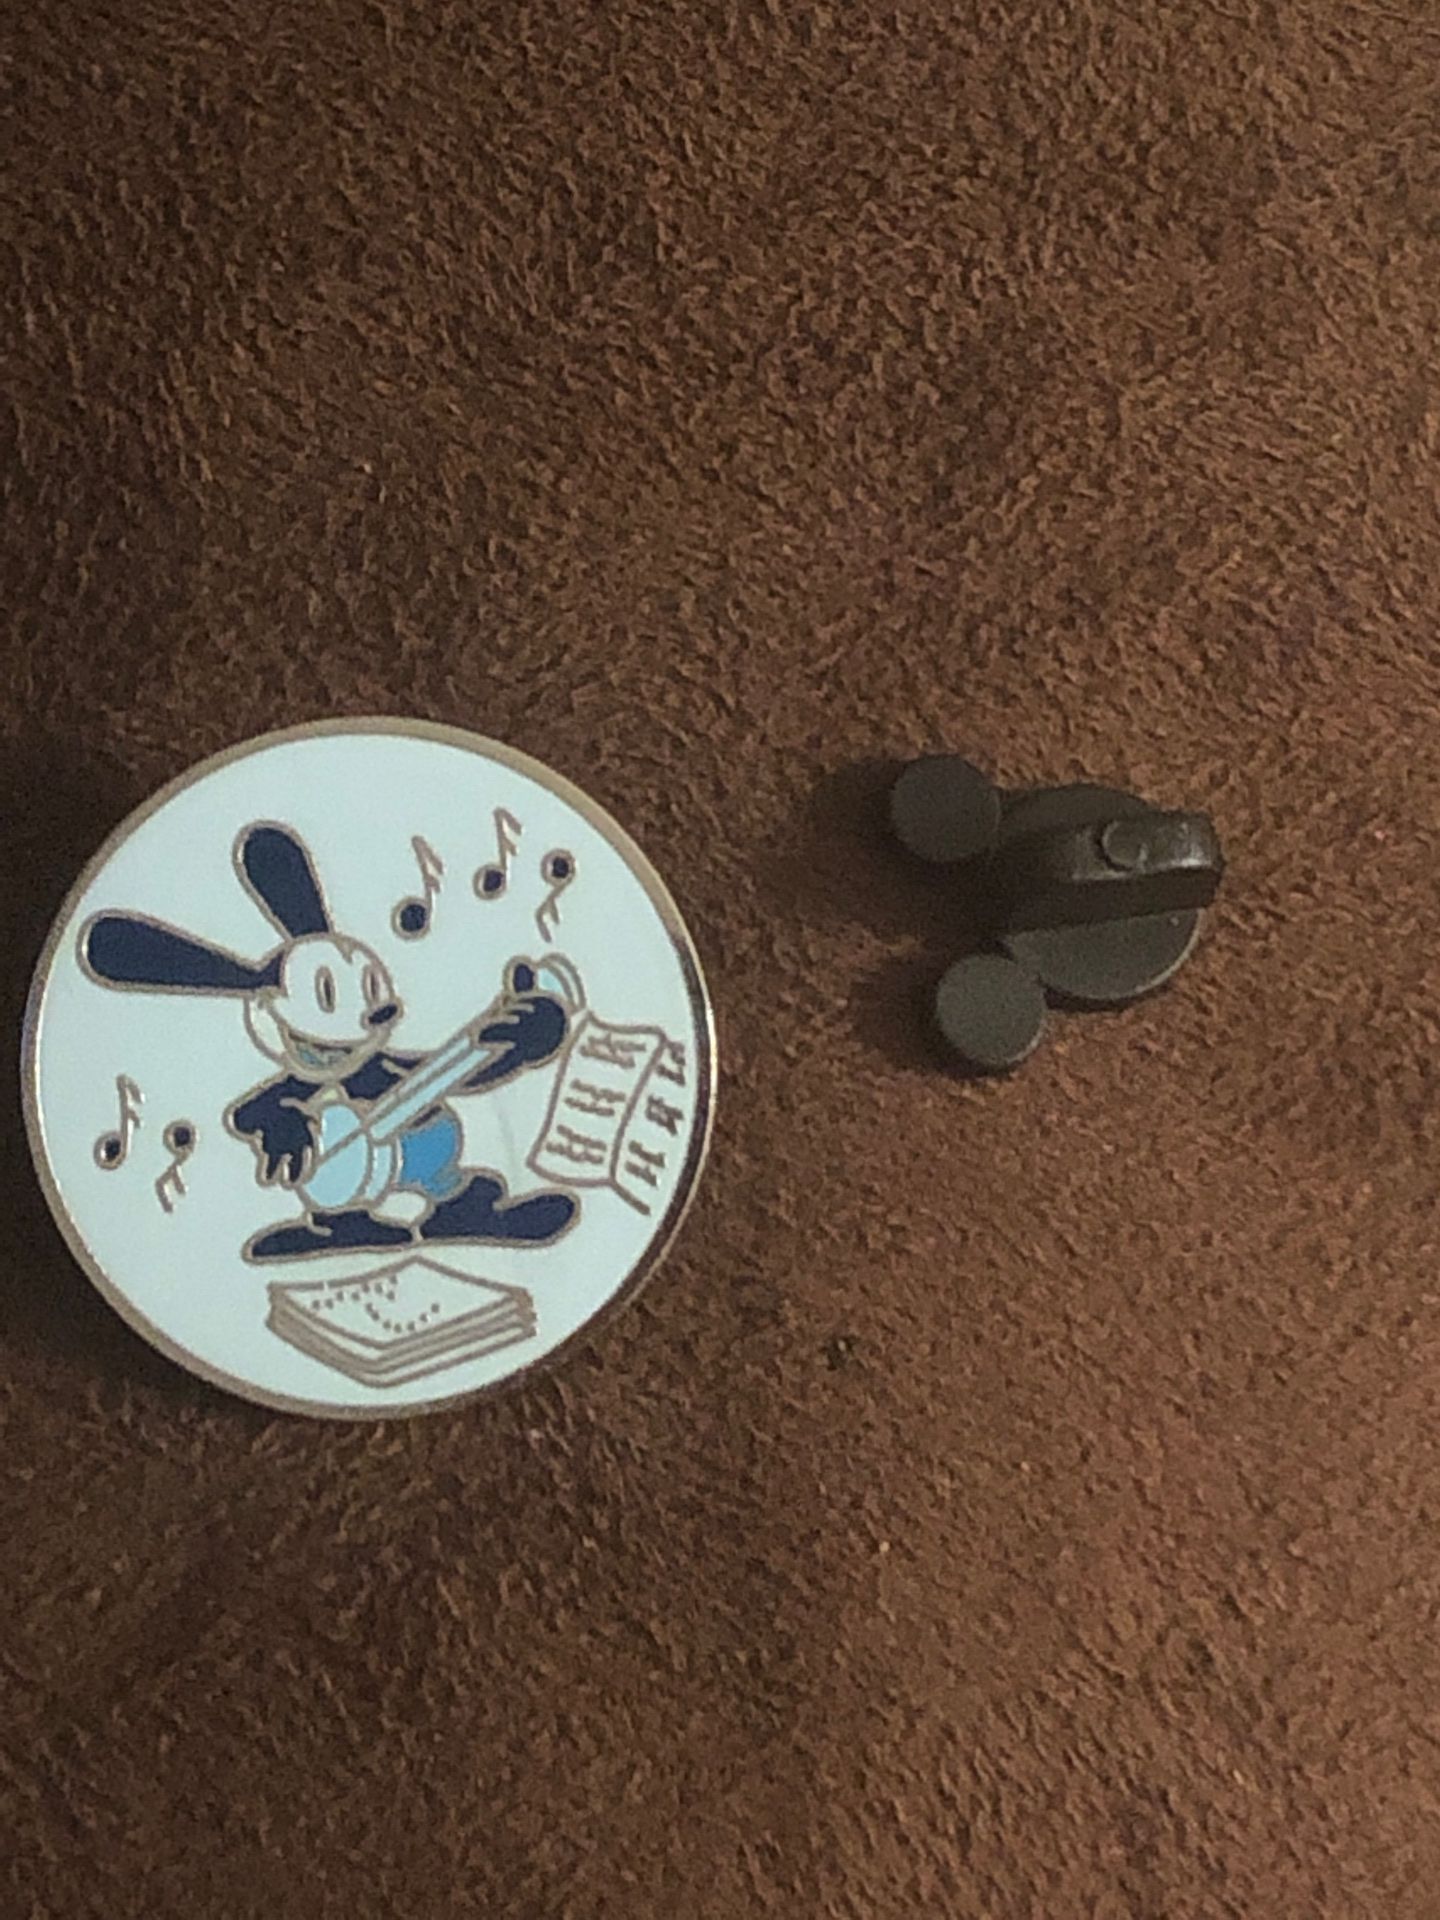 Disney Magical Mystery Pins Series 11 (OSWALD THE LUCKY RABBIT)